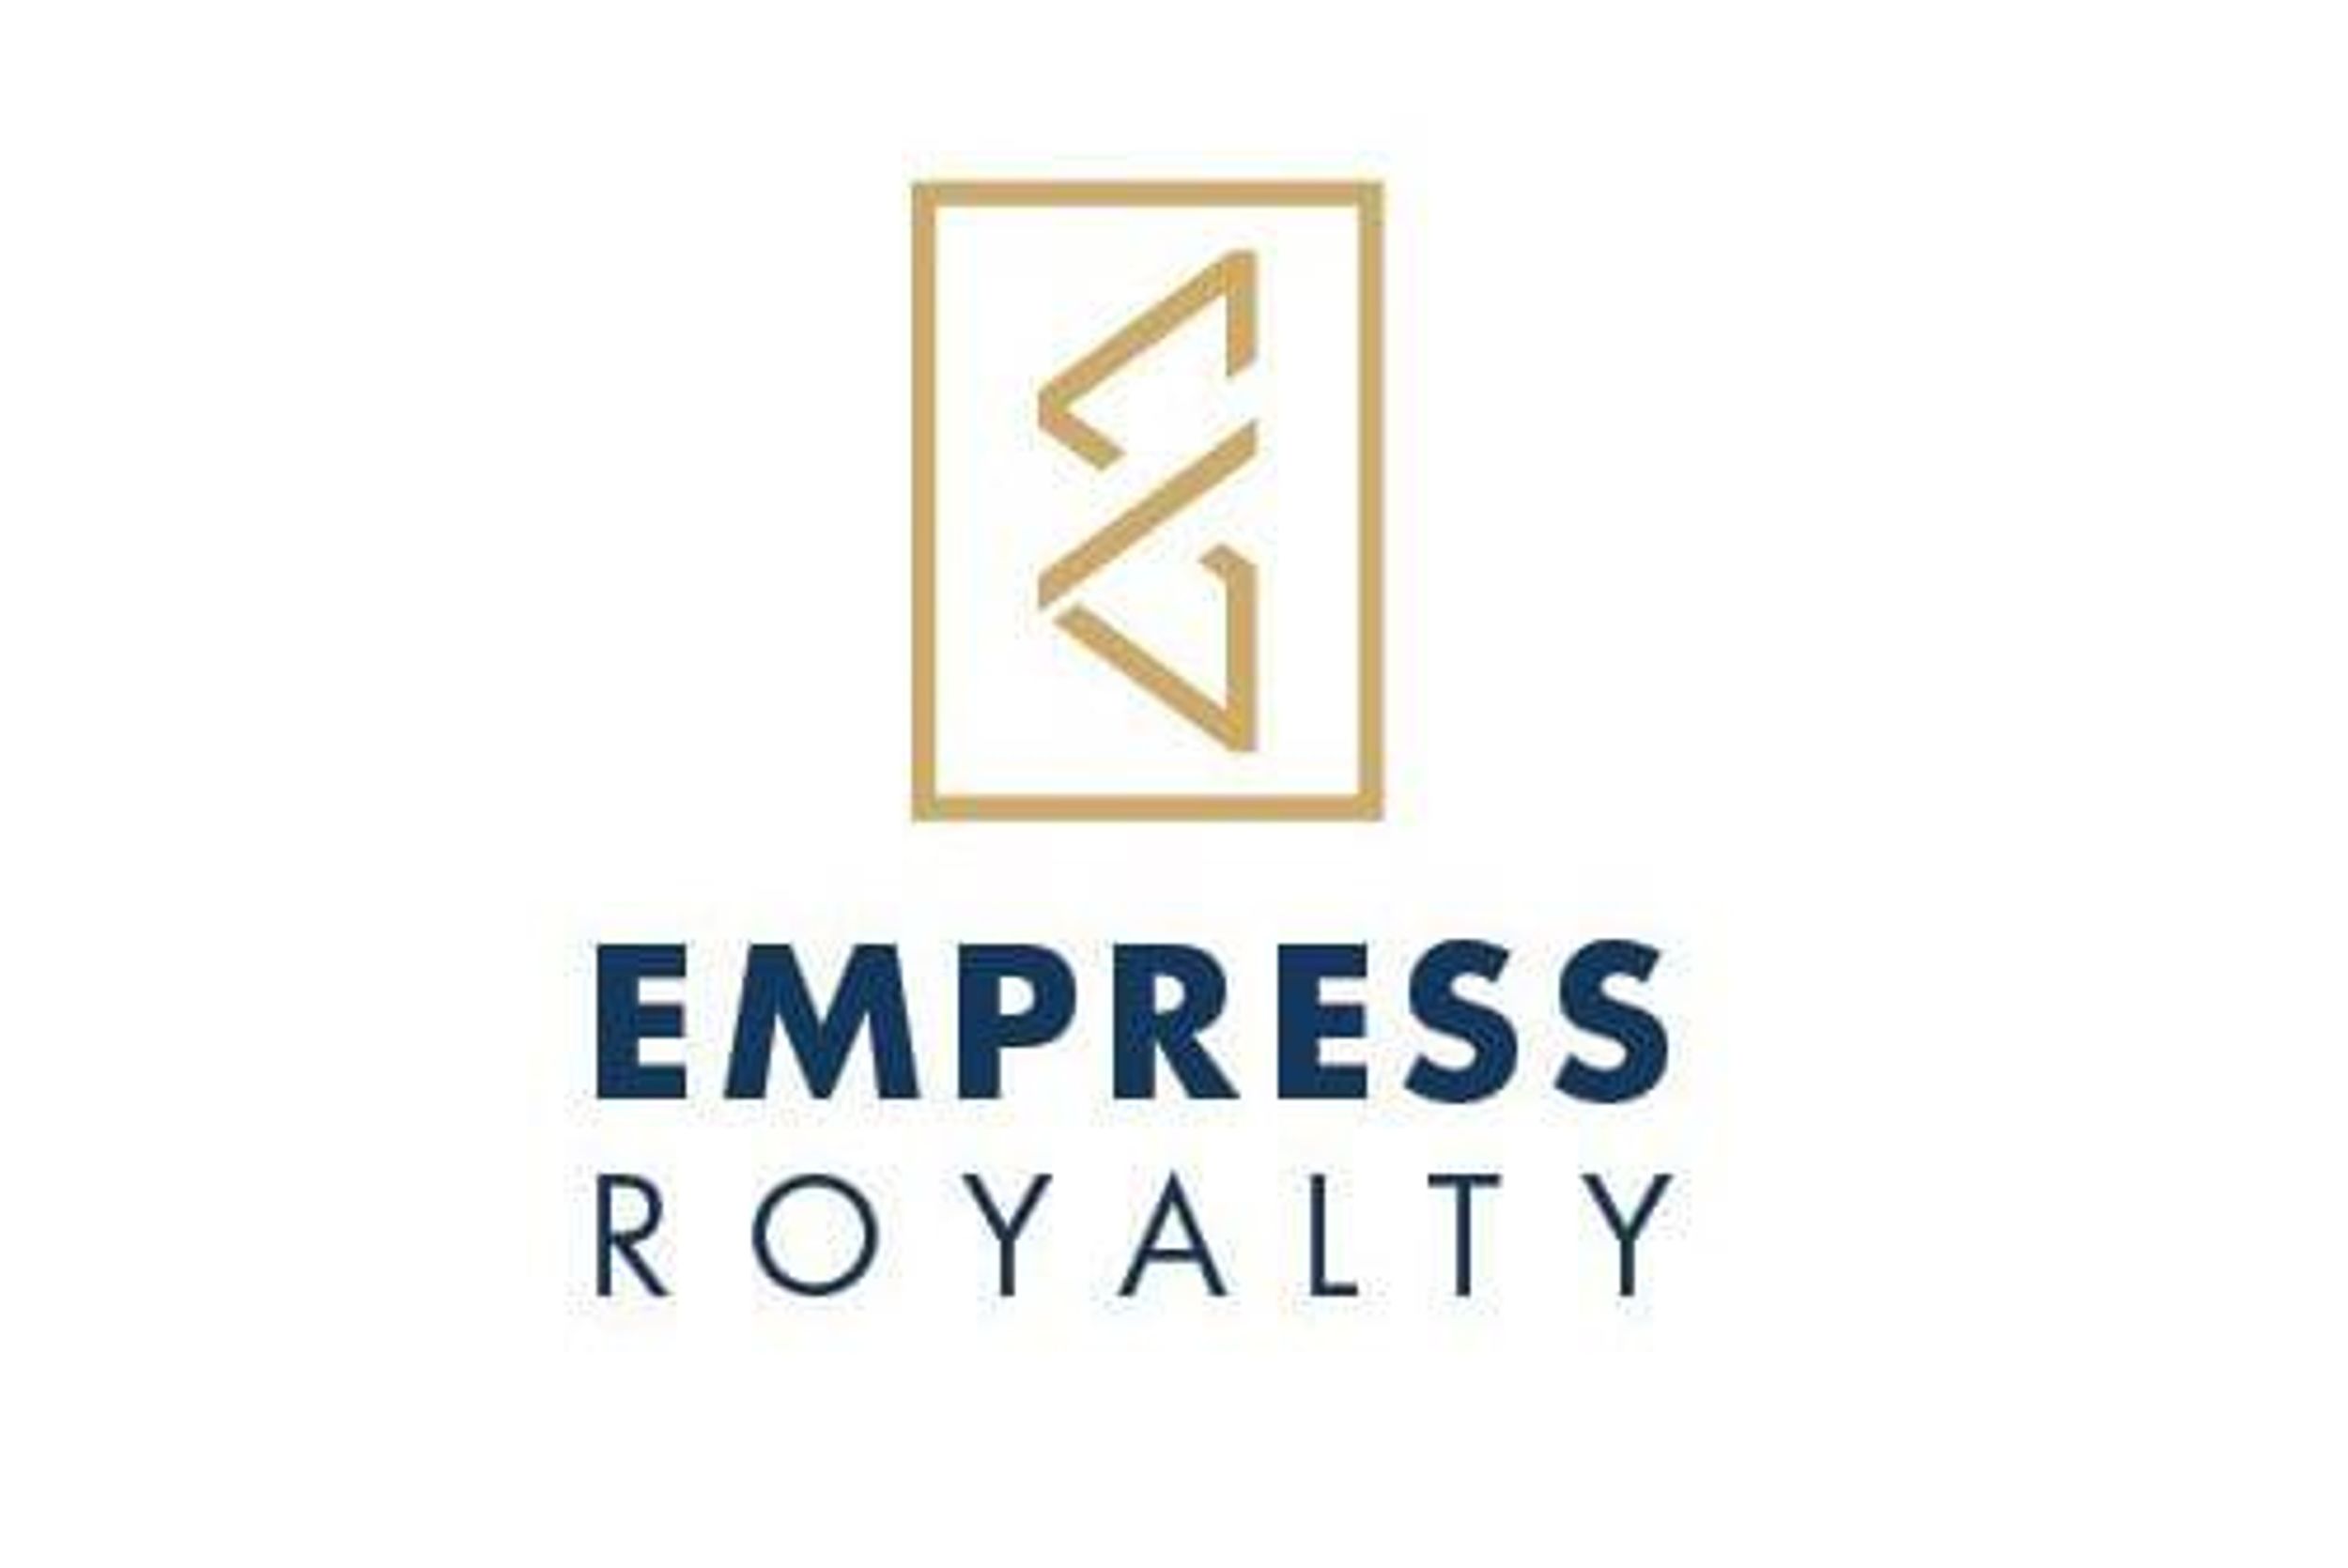 Empress Royalty Strengthens Management and Appoints New Chief Financial Officer